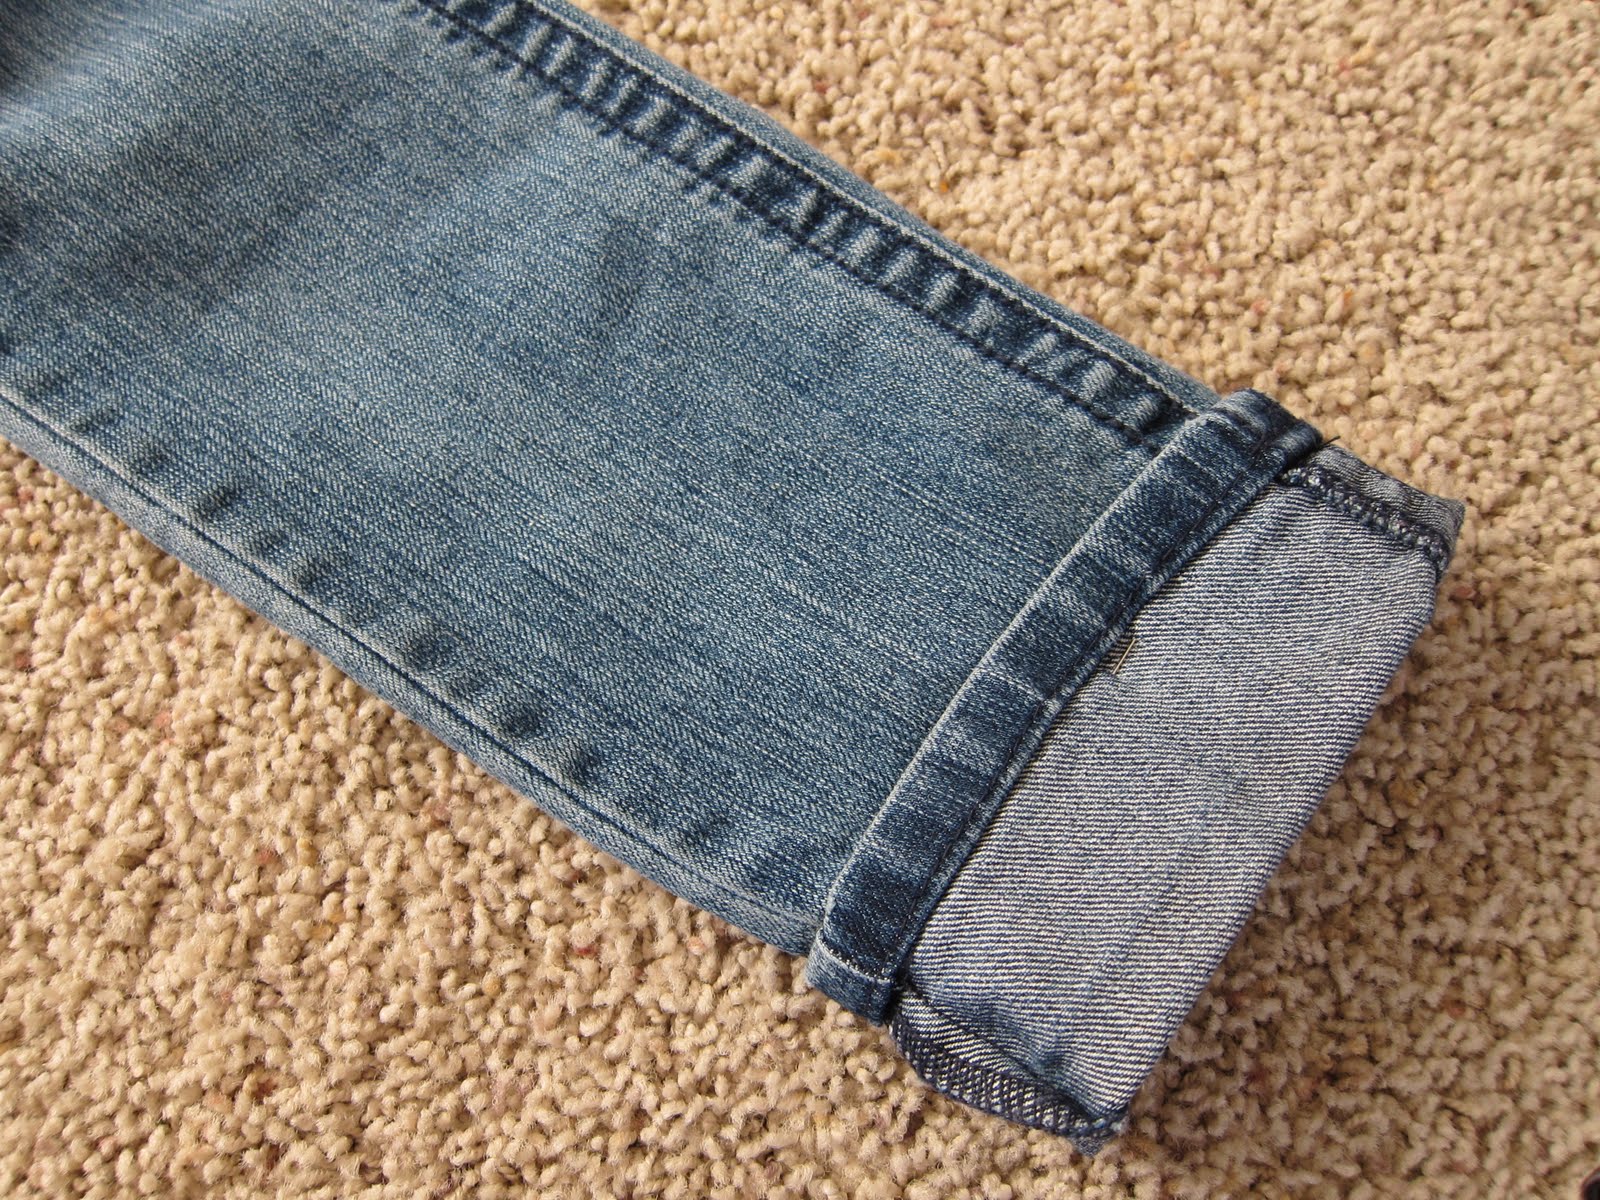 Hemming Jeans & Pants Without Losing the Original Hem (Easy